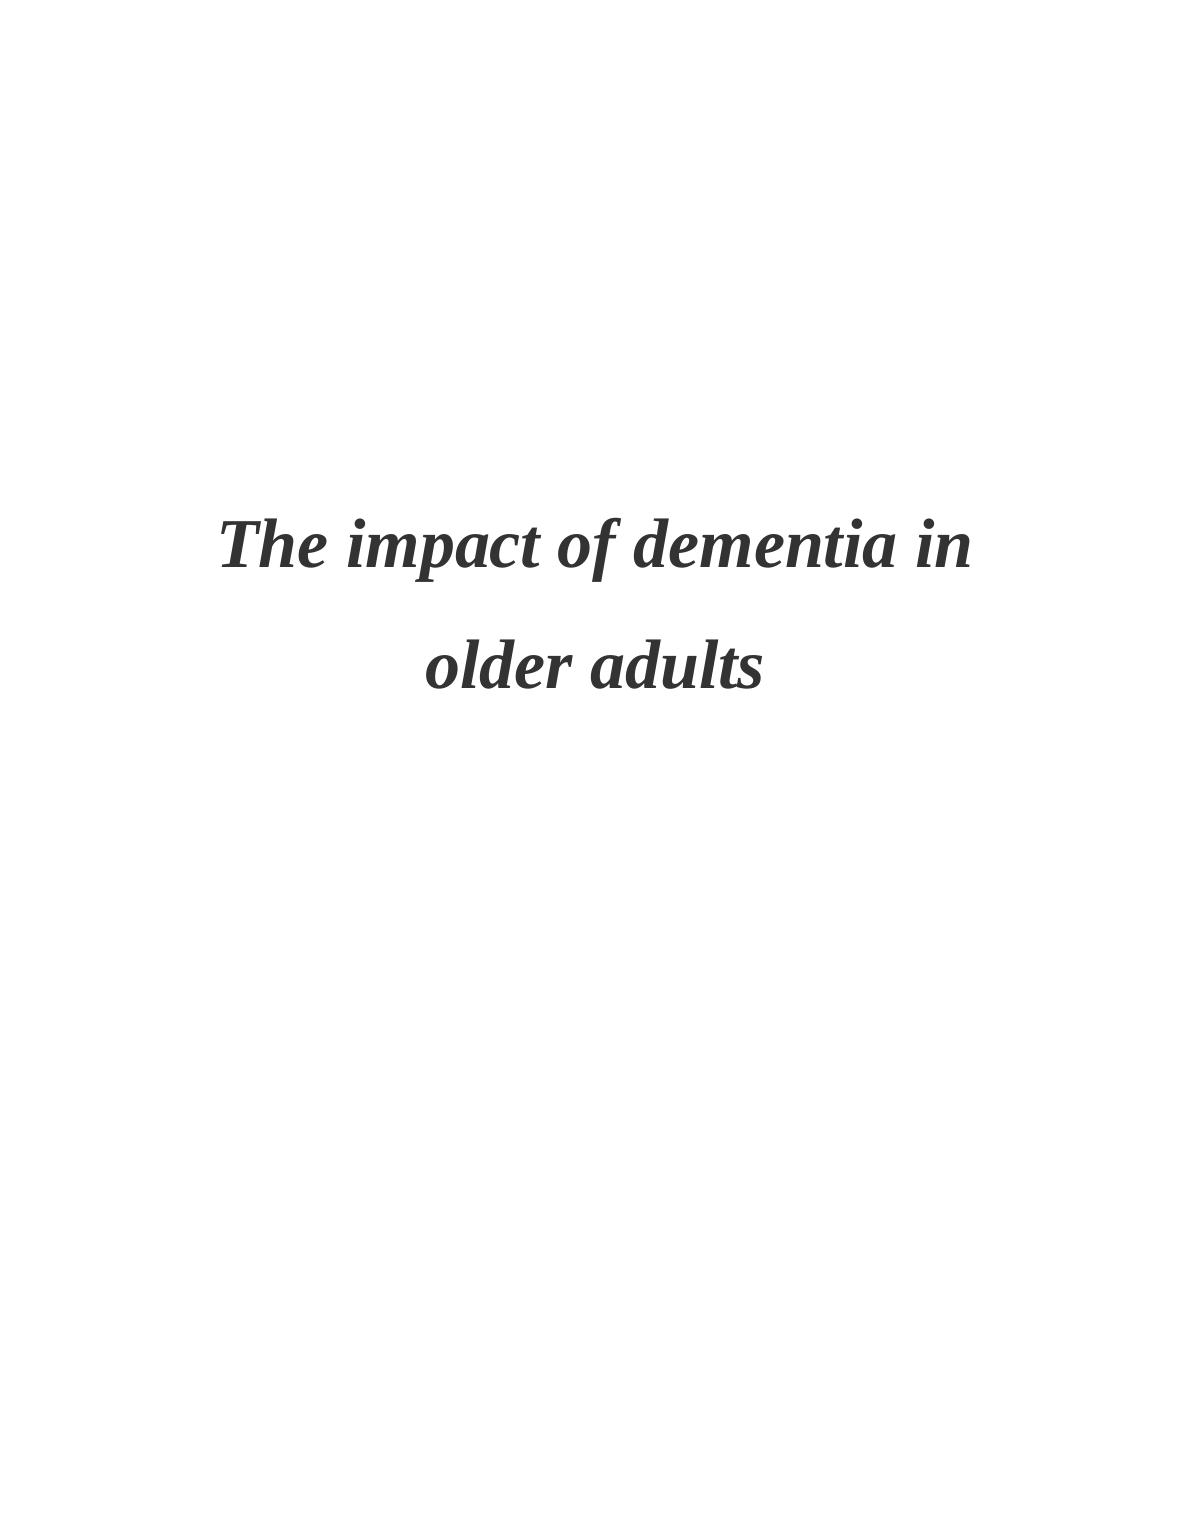 The Impact of Dementia in Older Adults_1